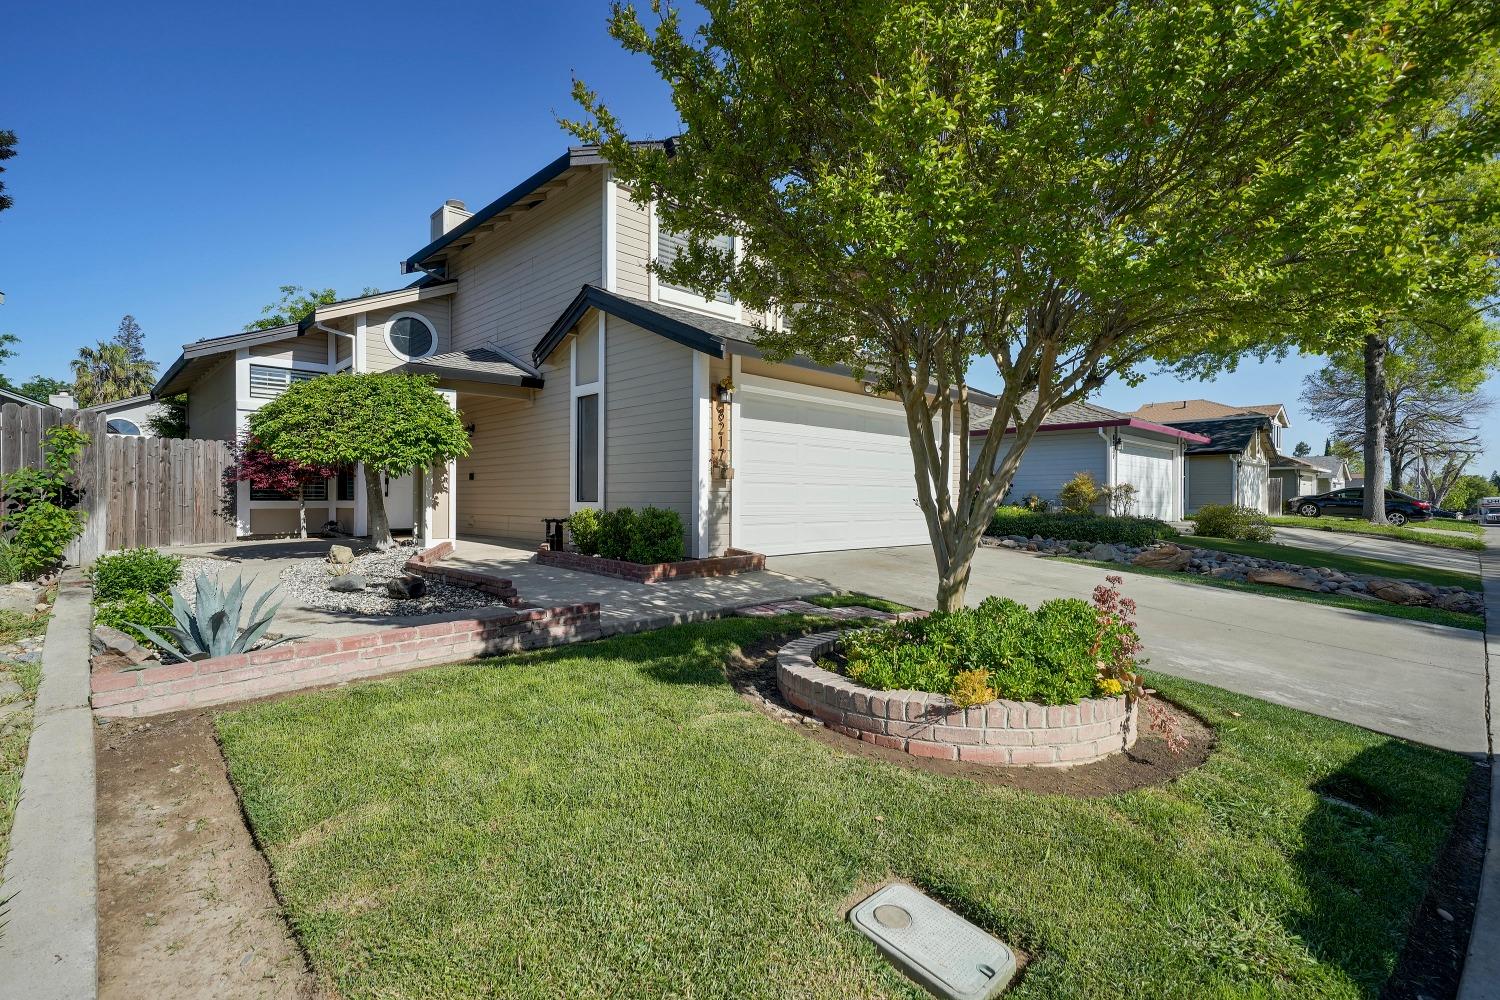 Located in the great community of Antelope, this beautiful 2-story home offers a traditional layout 